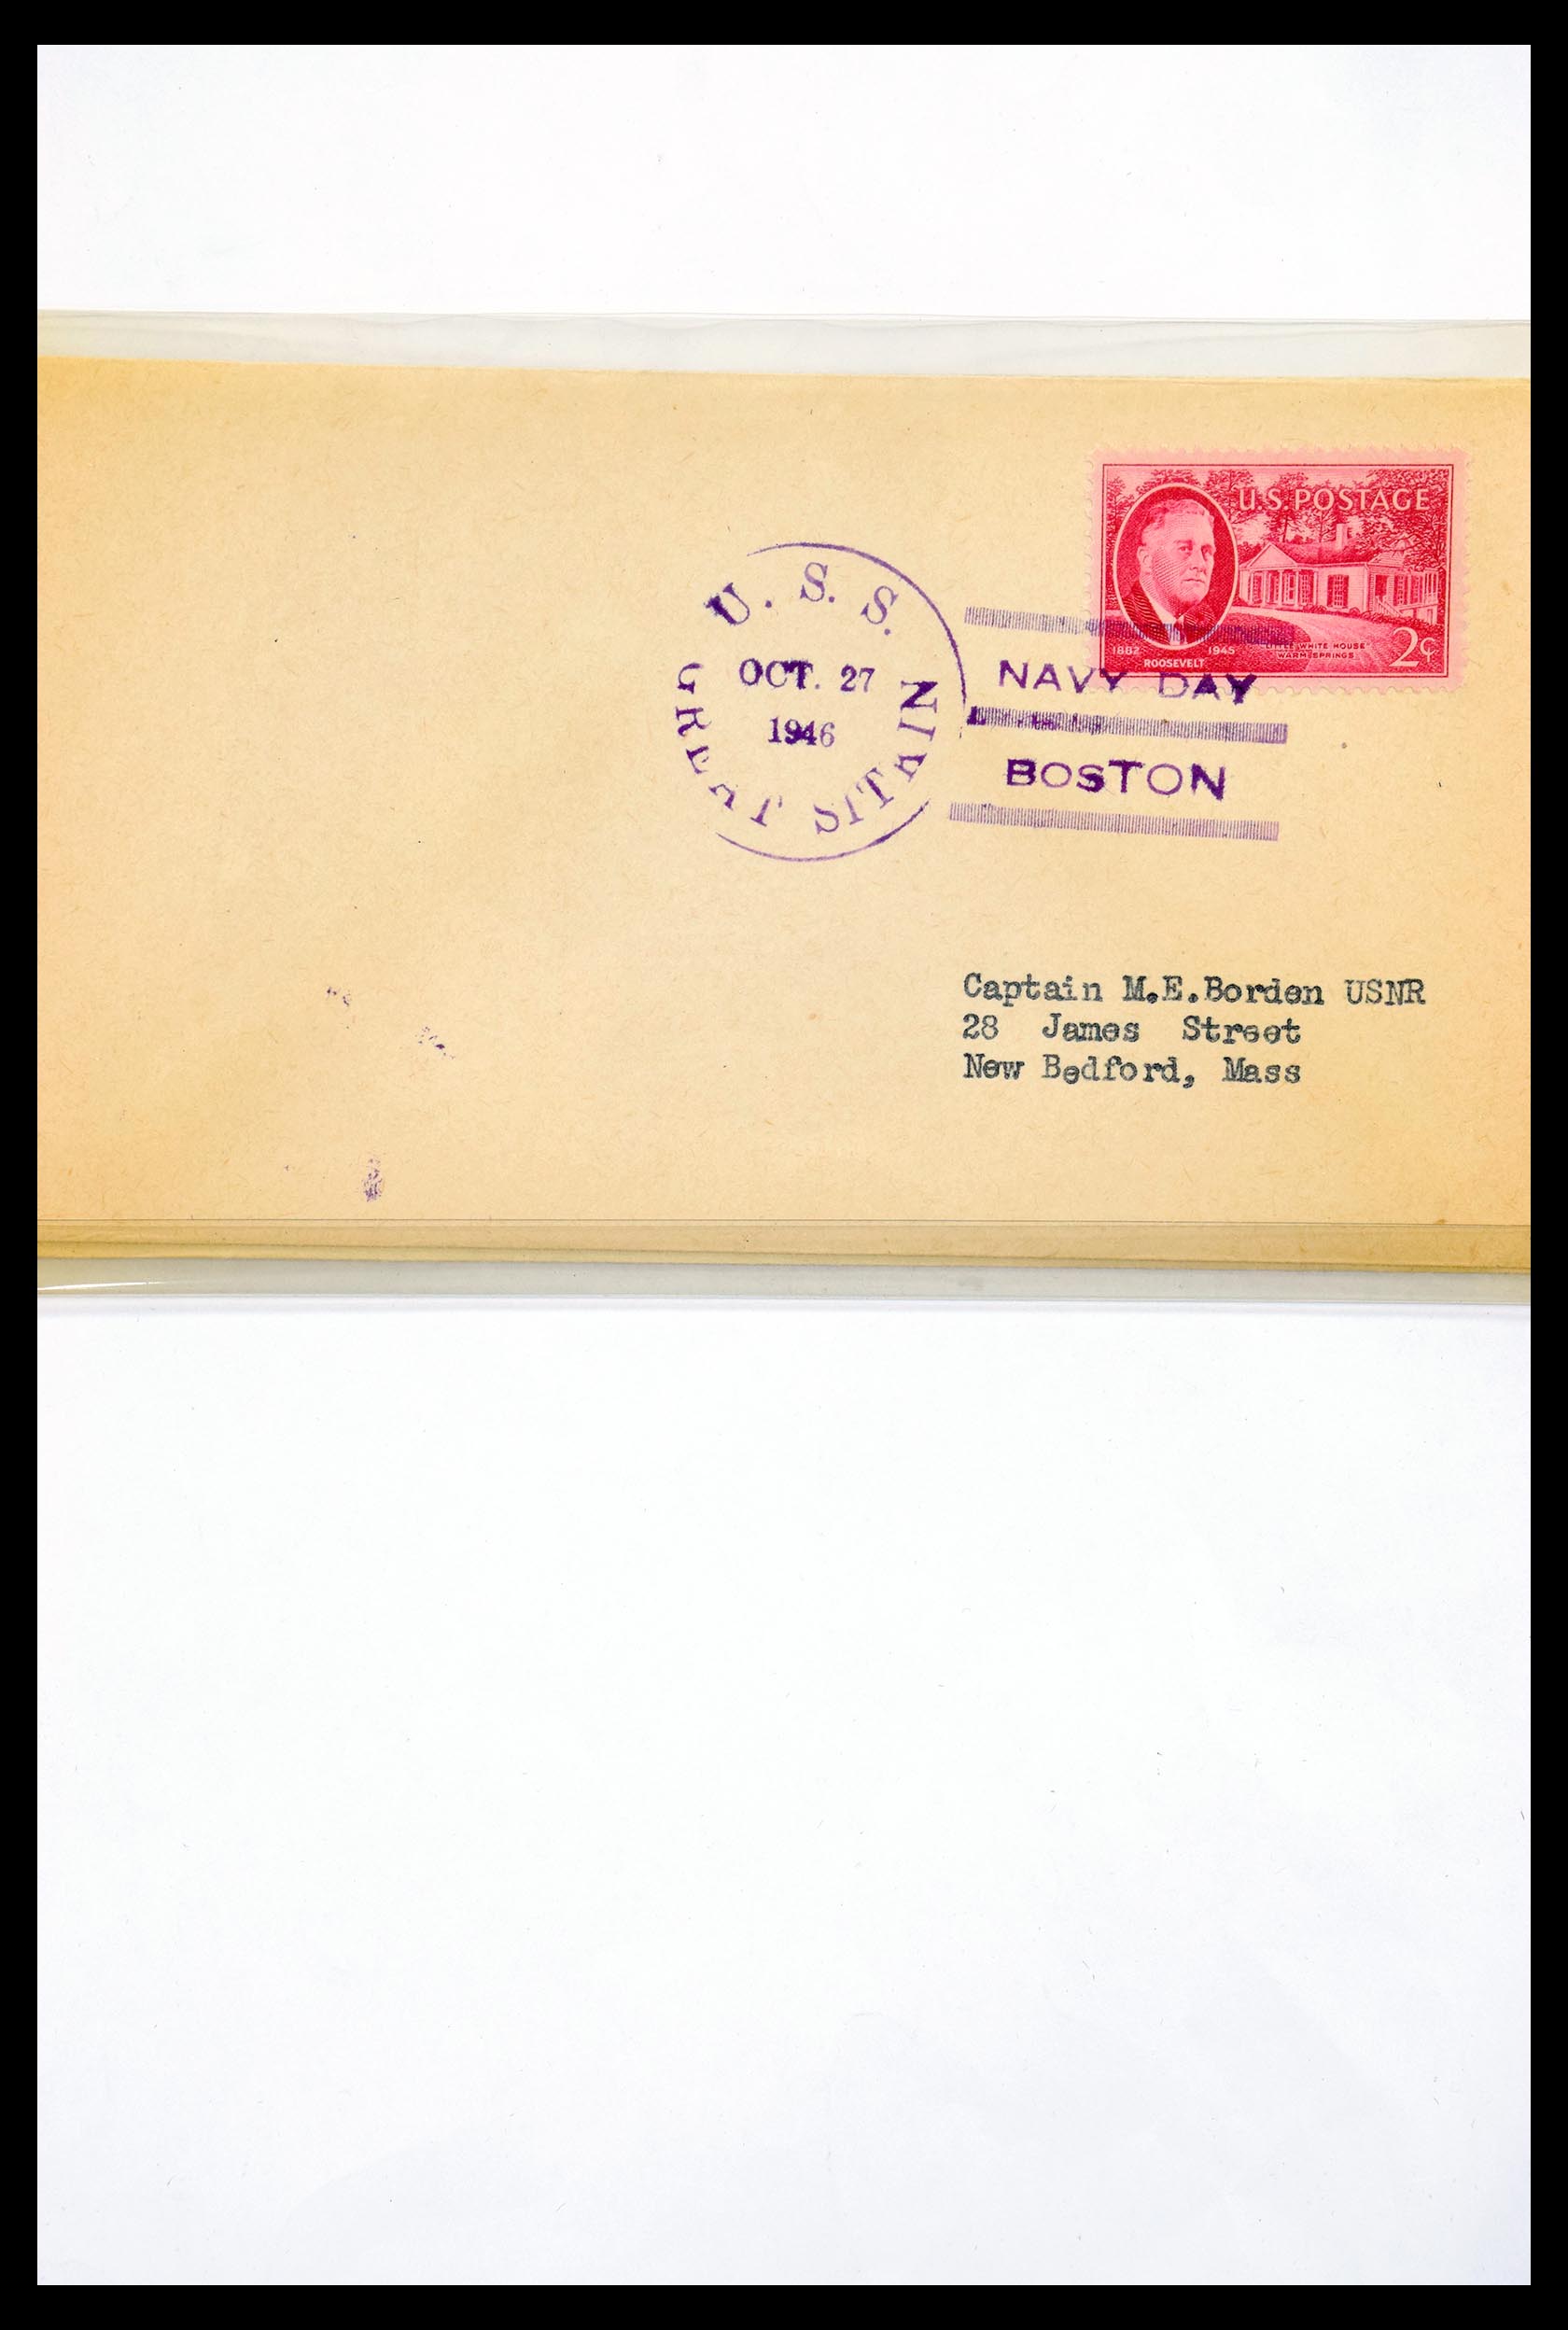 30341 301 - 30341 USA naval cover collection 1930-1970.